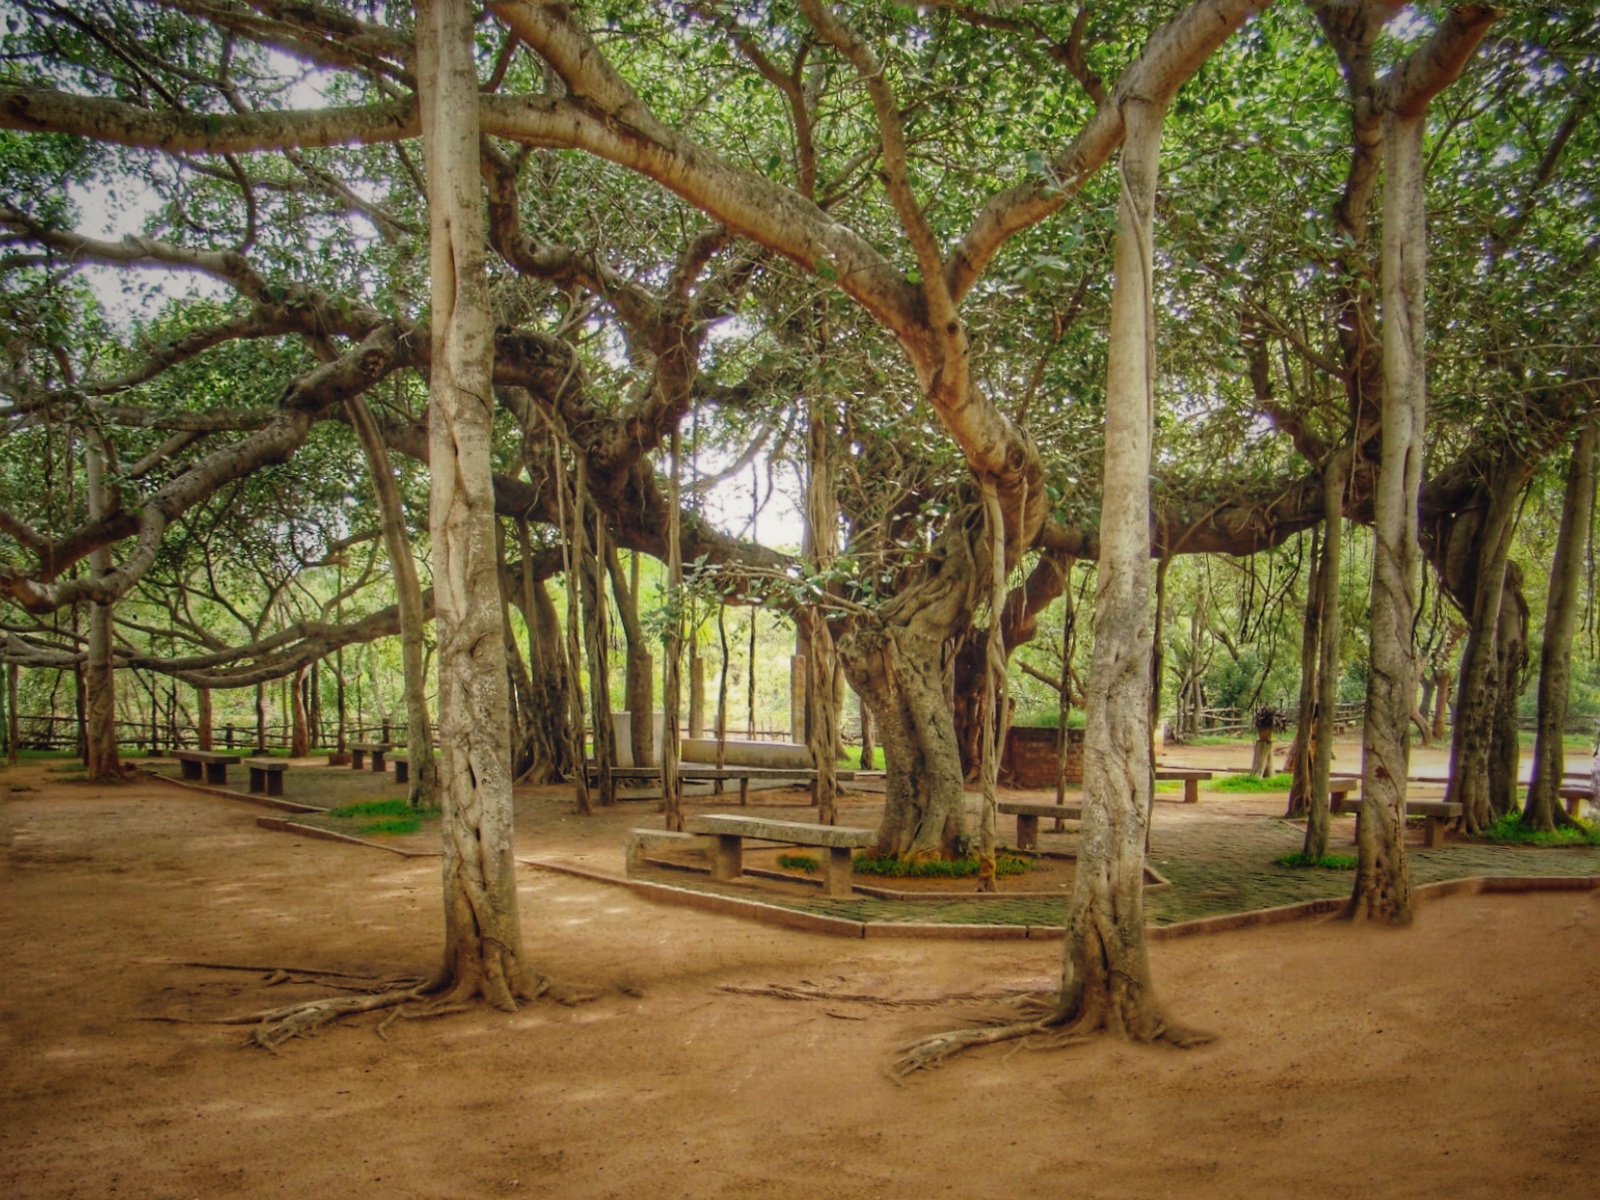 100 years old Banyan tree with its aerial roots at Matrimandir